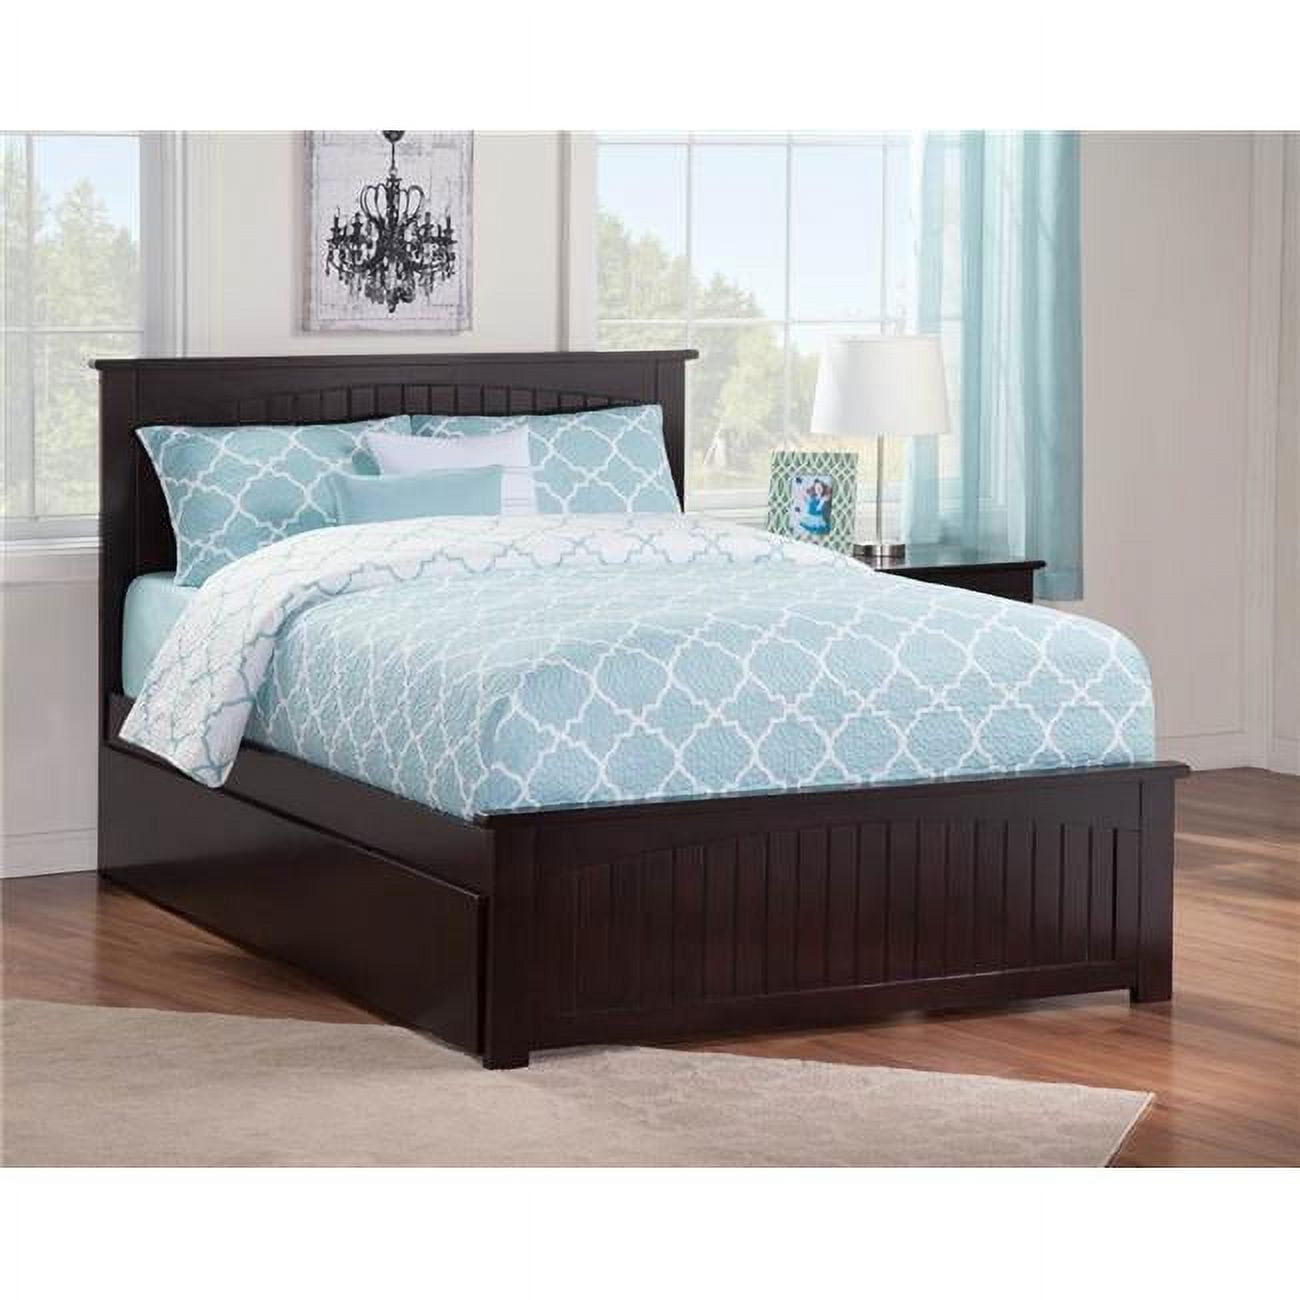 Picture of Atlantic Furniture AR8236011 Nantucket Match Footboard with Urban Trundle Bed - Espresso, Full Size